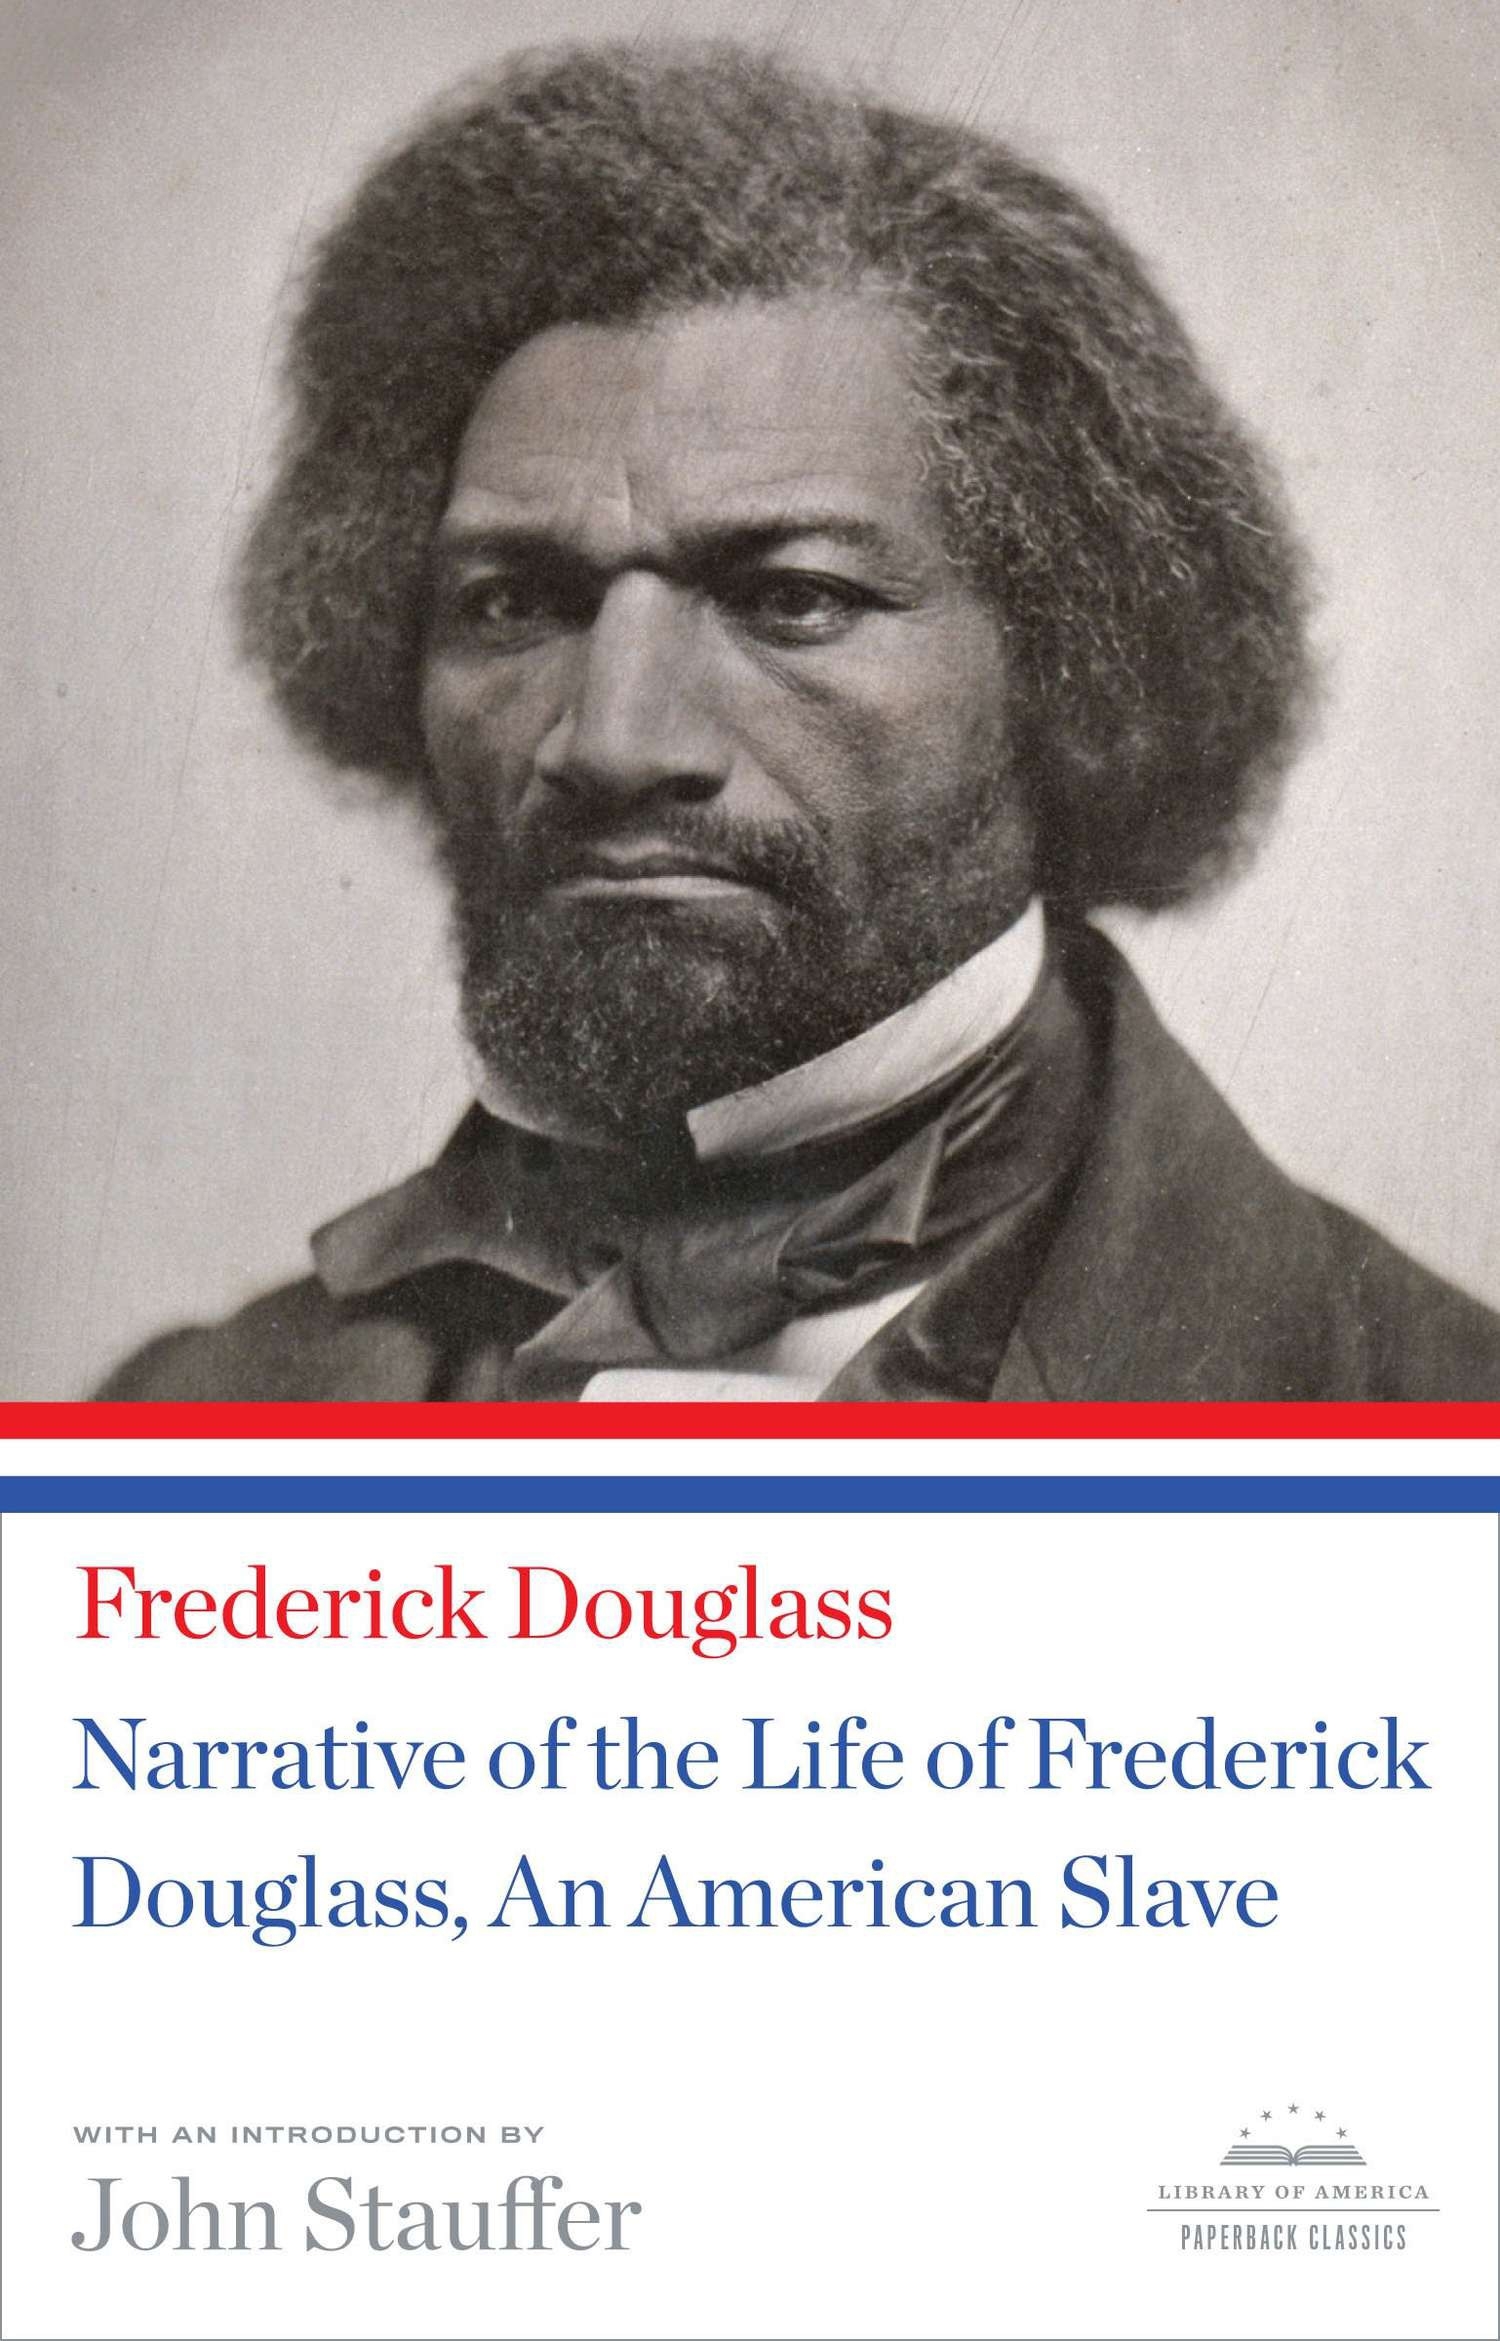 narrative of the life of frederick douglass an american slave